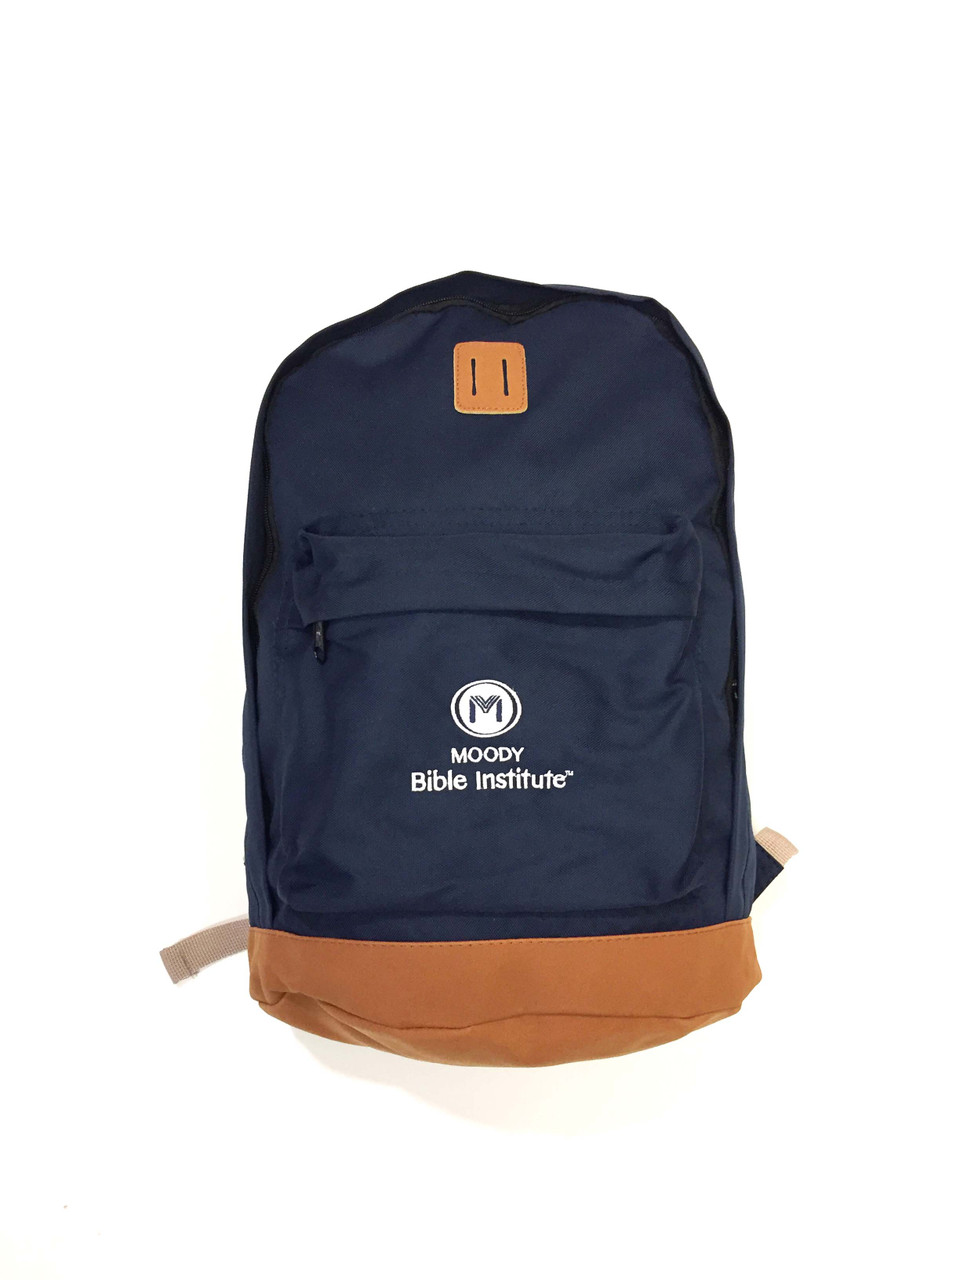 MBI Nomad Backpack - Moody Gear of Moody Bible Institute